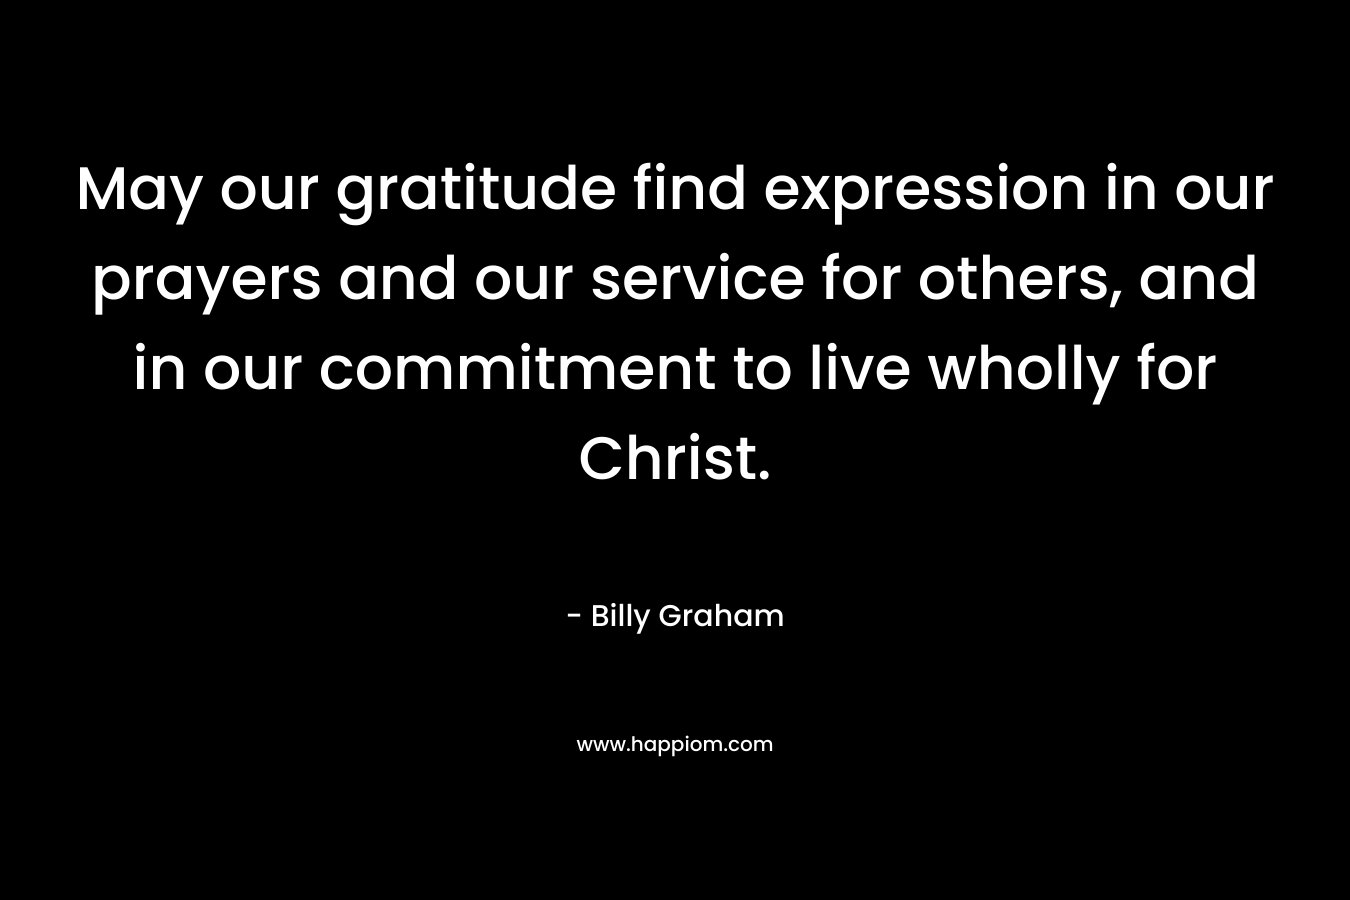 May our gratitude find expression in our prayers and our service for others, and in our commitment to live wholly for Christ.